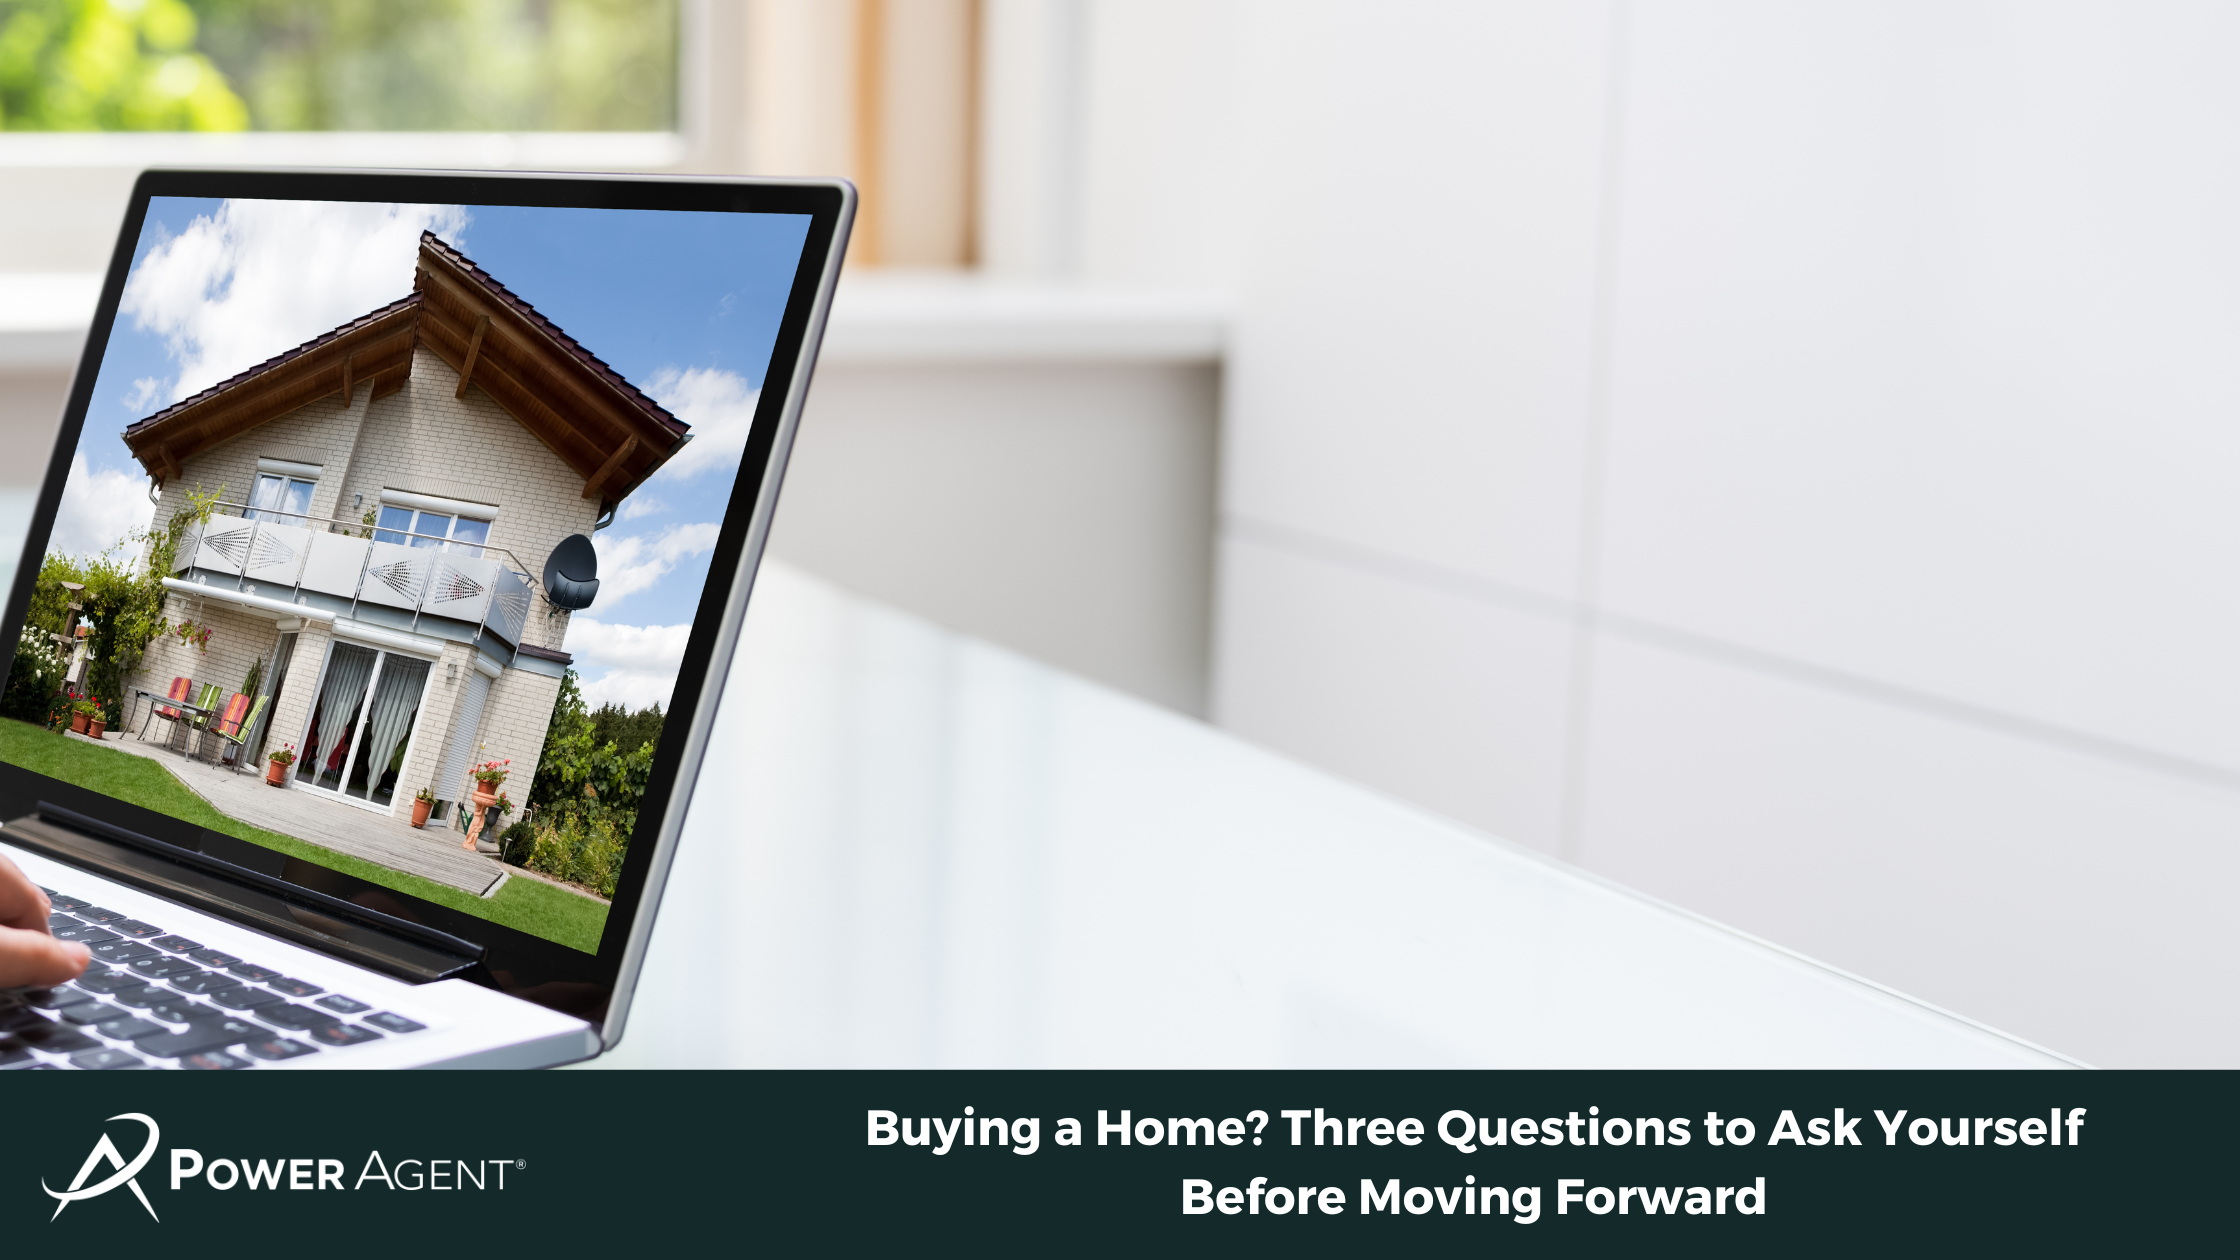 Buying a Home? Three Questions to Ask Yourself Before Moving Forward